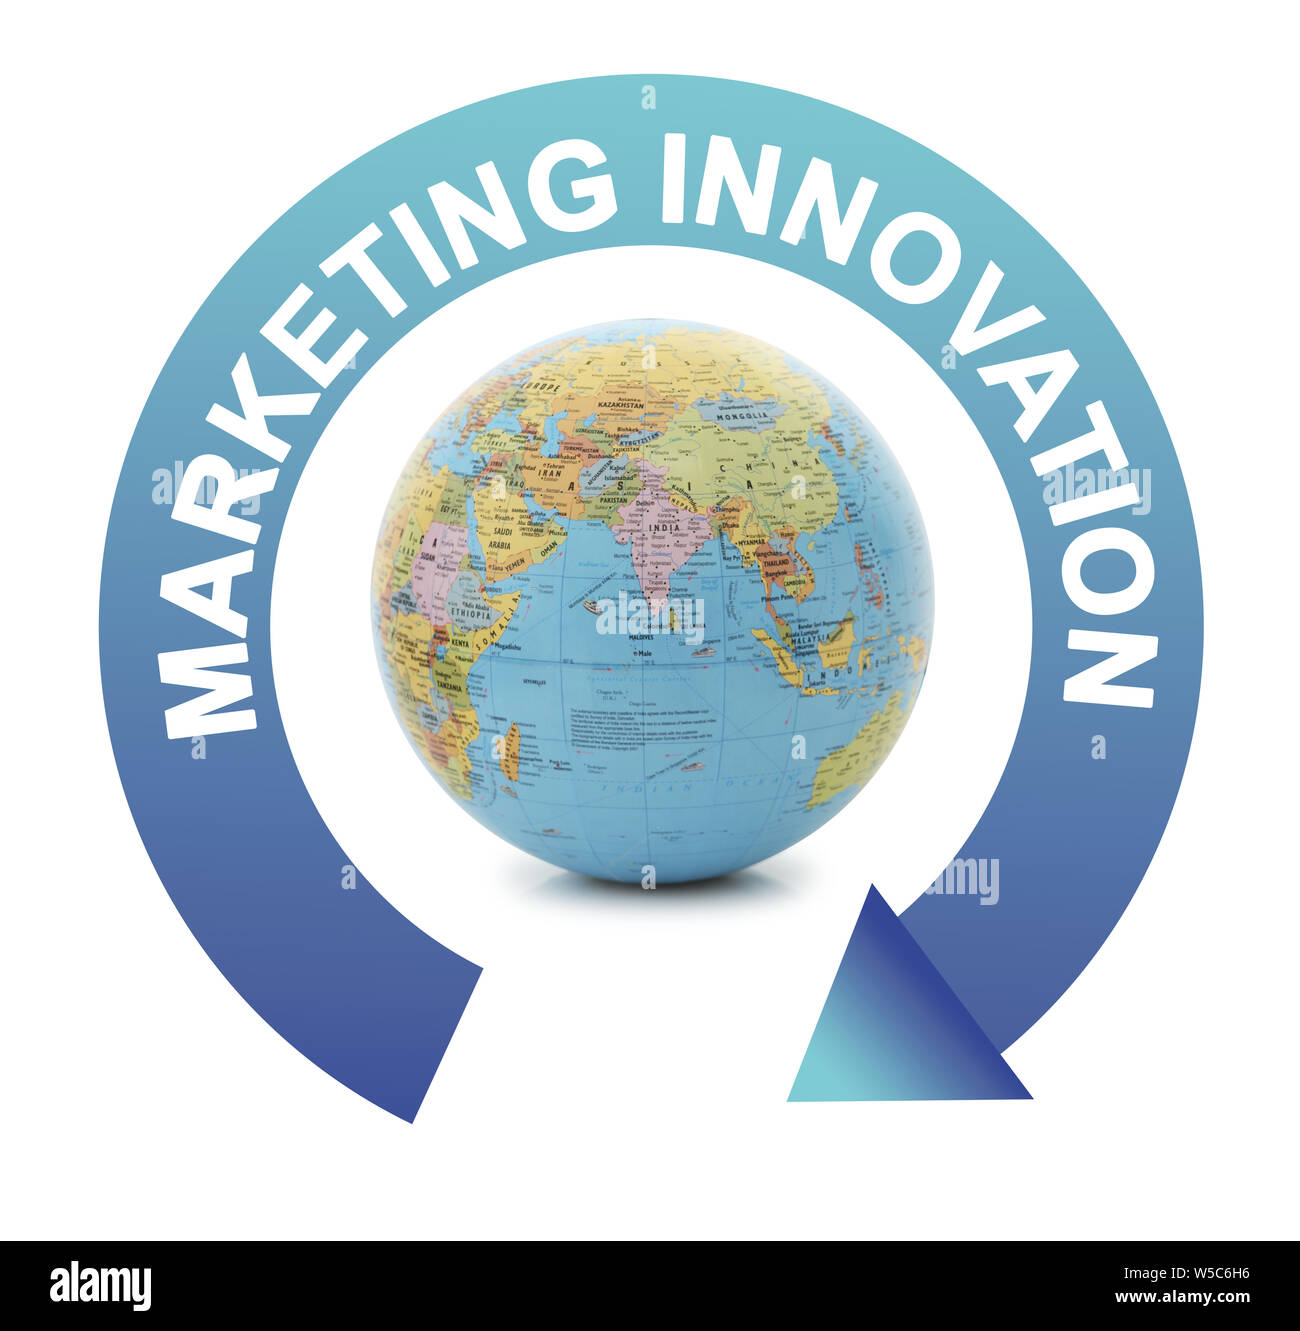 Marketing innovation cycle with a globe Stock Photo